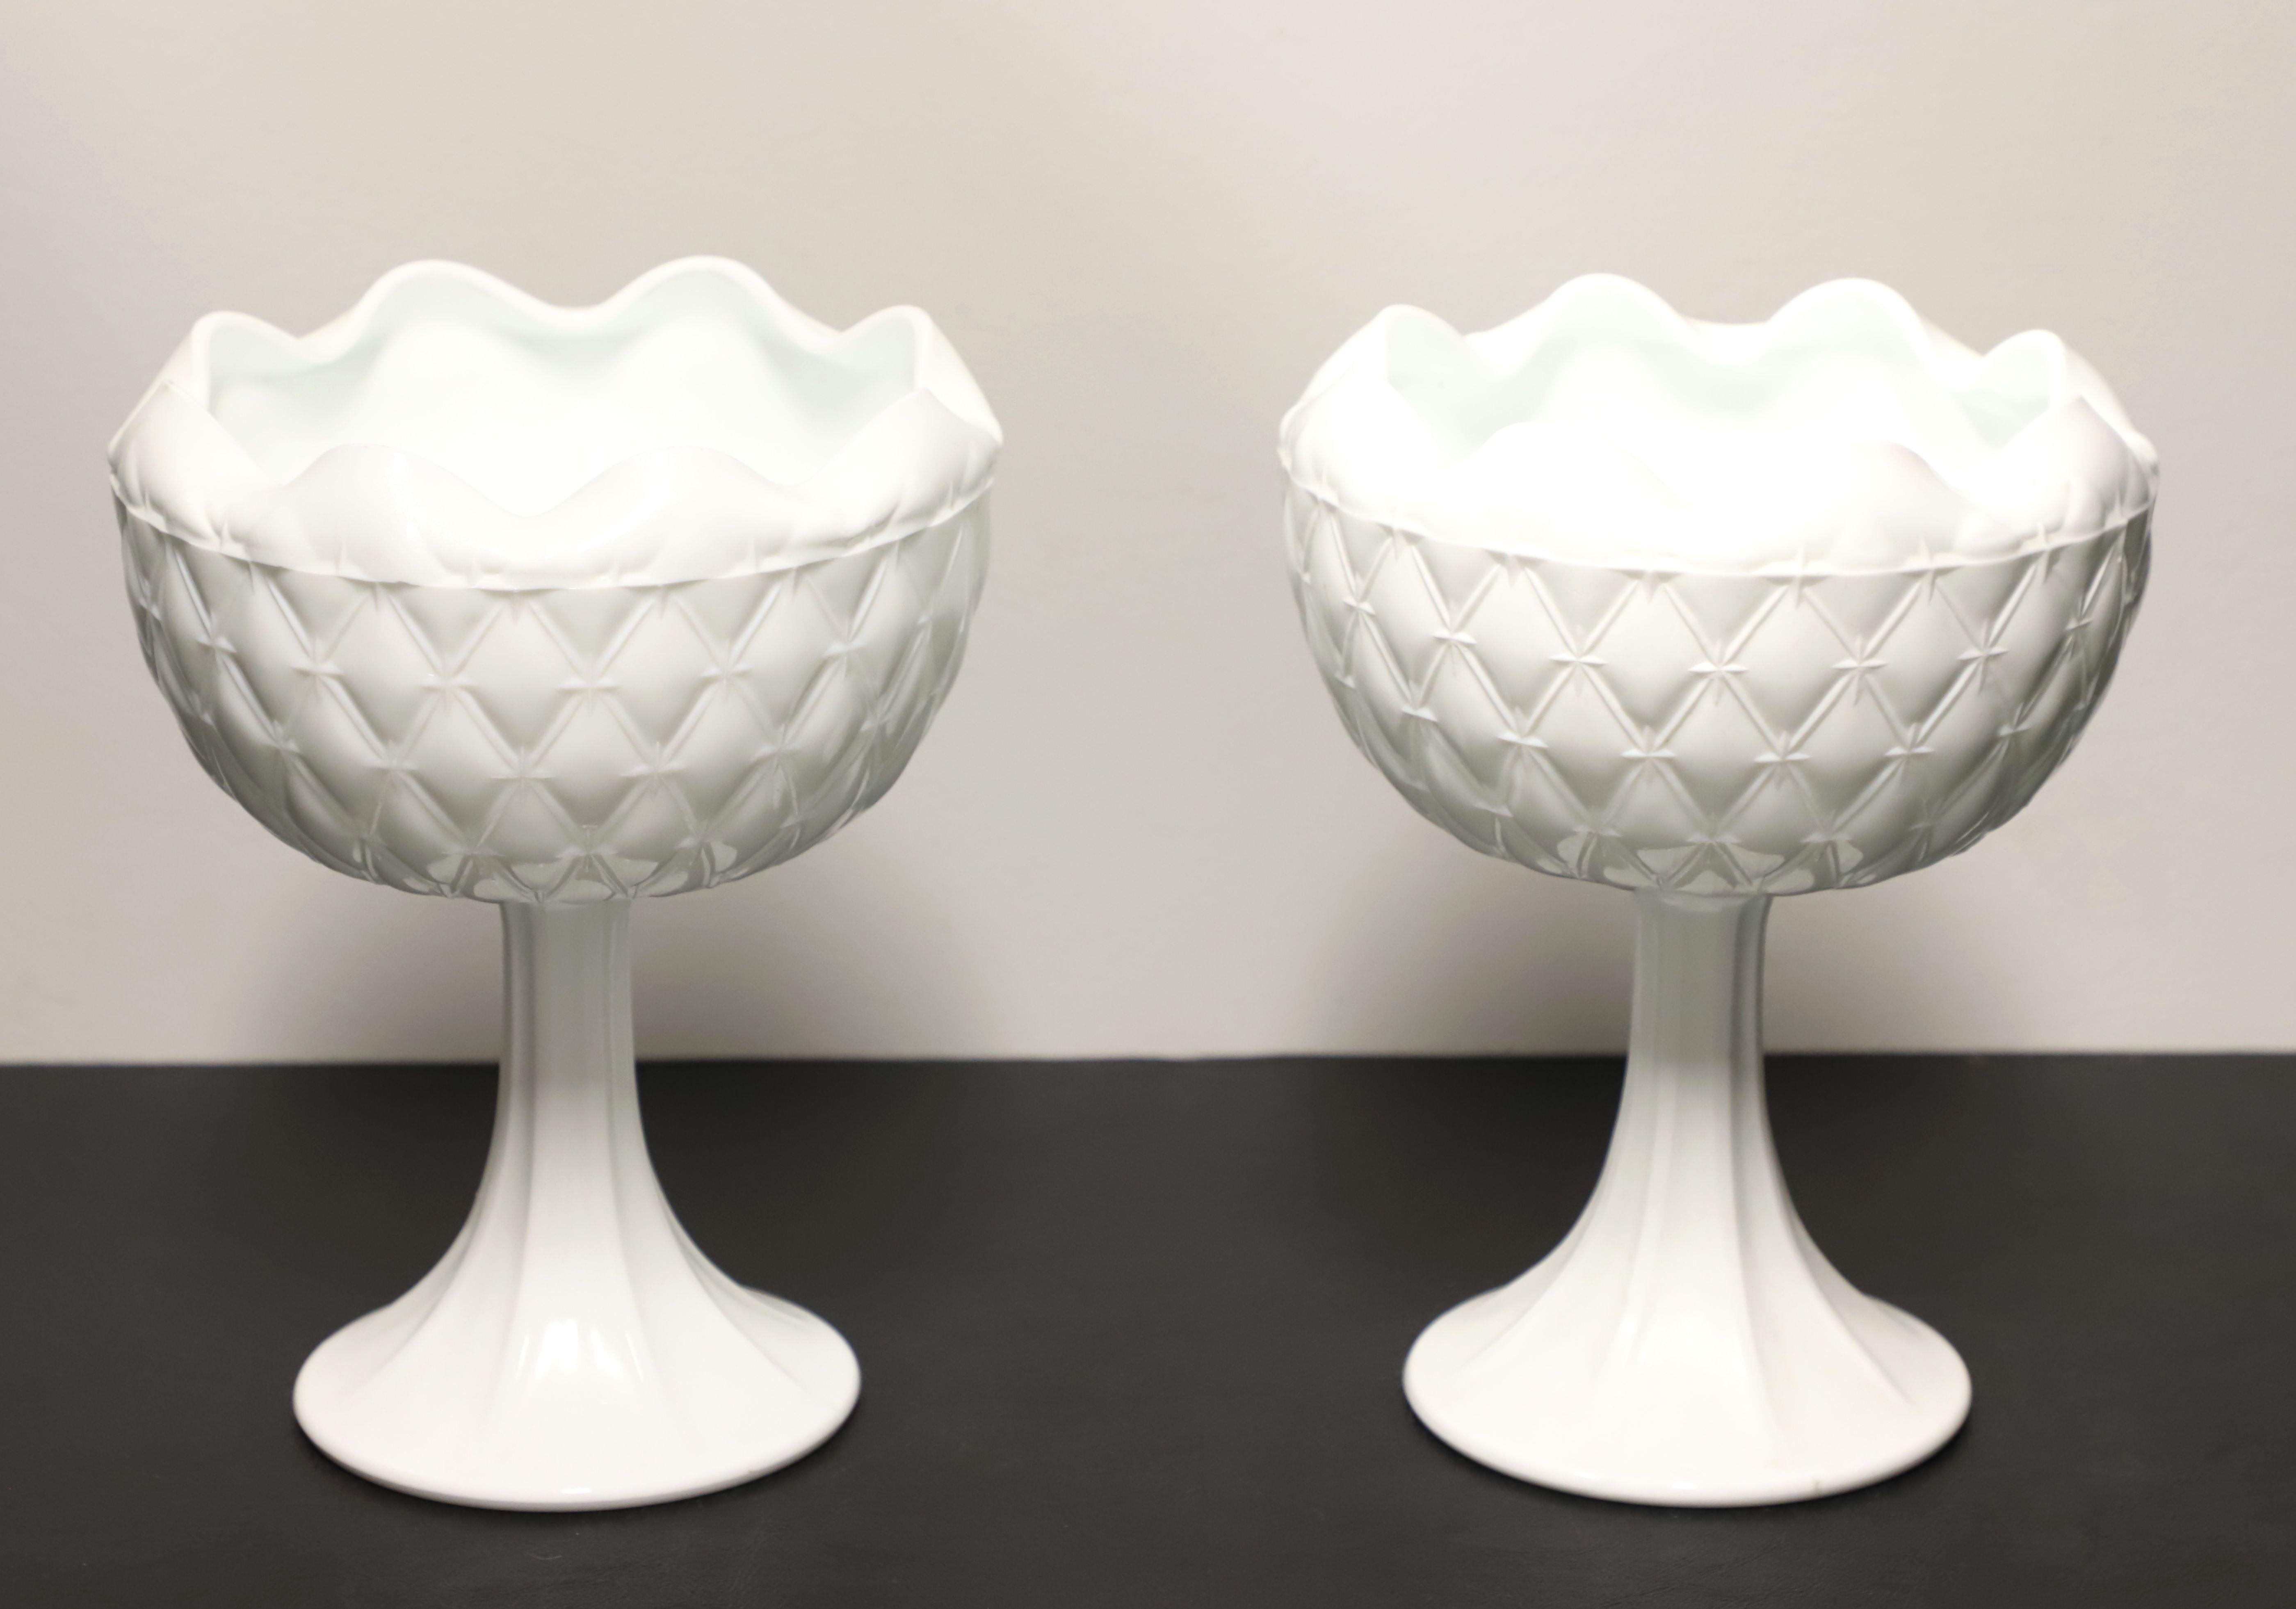 A pair of white milk glass pedestal table vases, unbranded. Pure white milk glass with a scalloped edge, cut diamond pattern to the bowl and a textured trumpet-shaped pedestal. Made in the USA, in the mid 20th Century.

Measures:   7w 7d 9h Each,